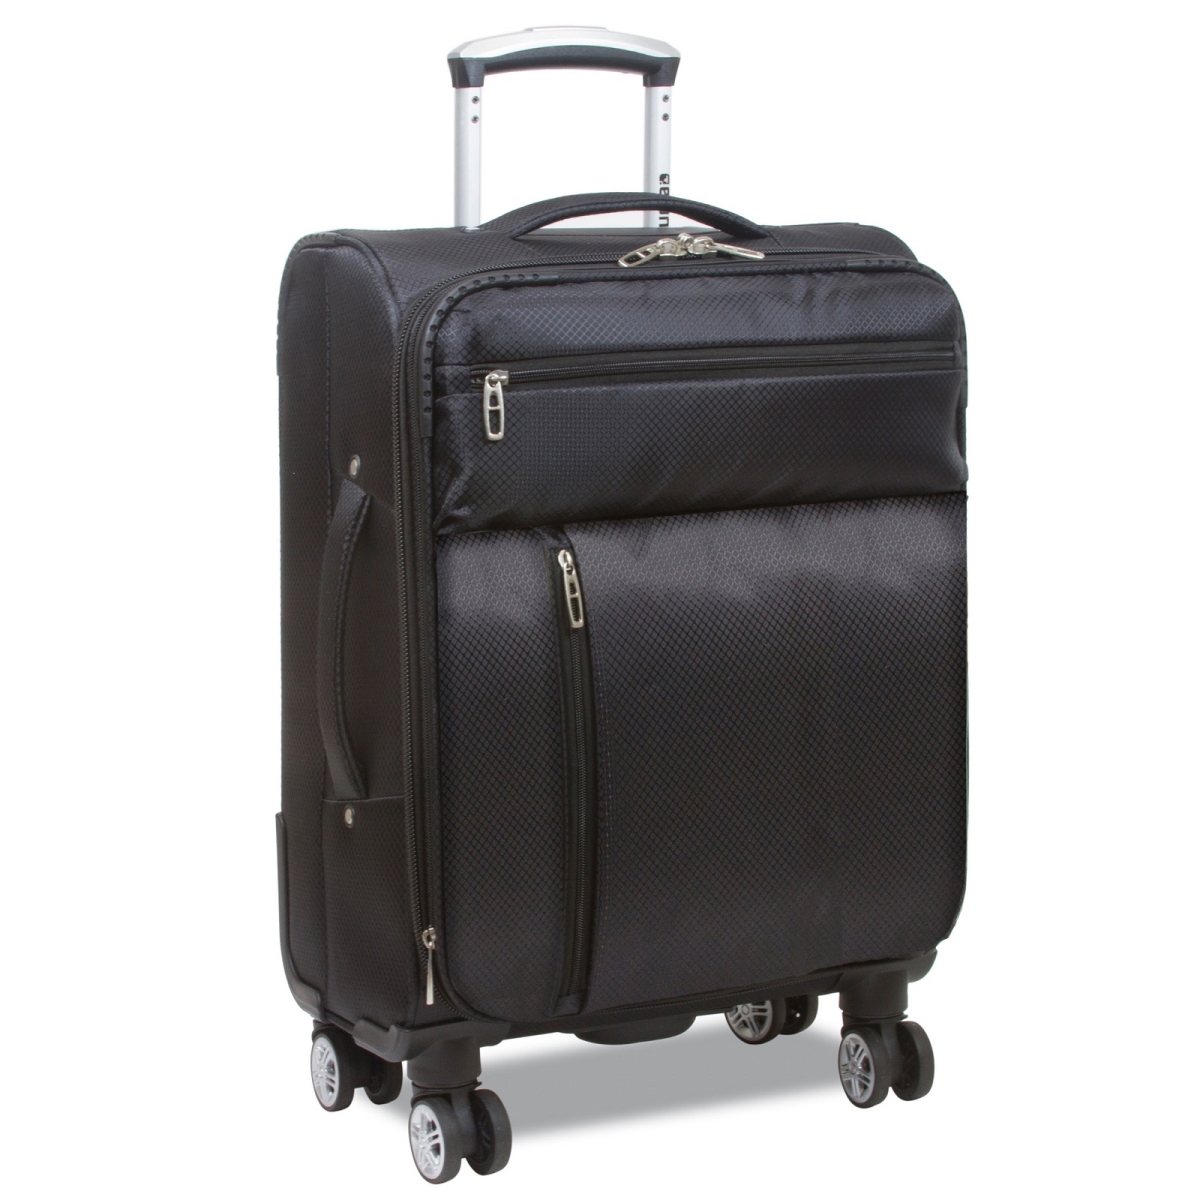 25dj-041r 20 In. Voyager Carry-on Luggage With Laptop Computer Compartment, Black